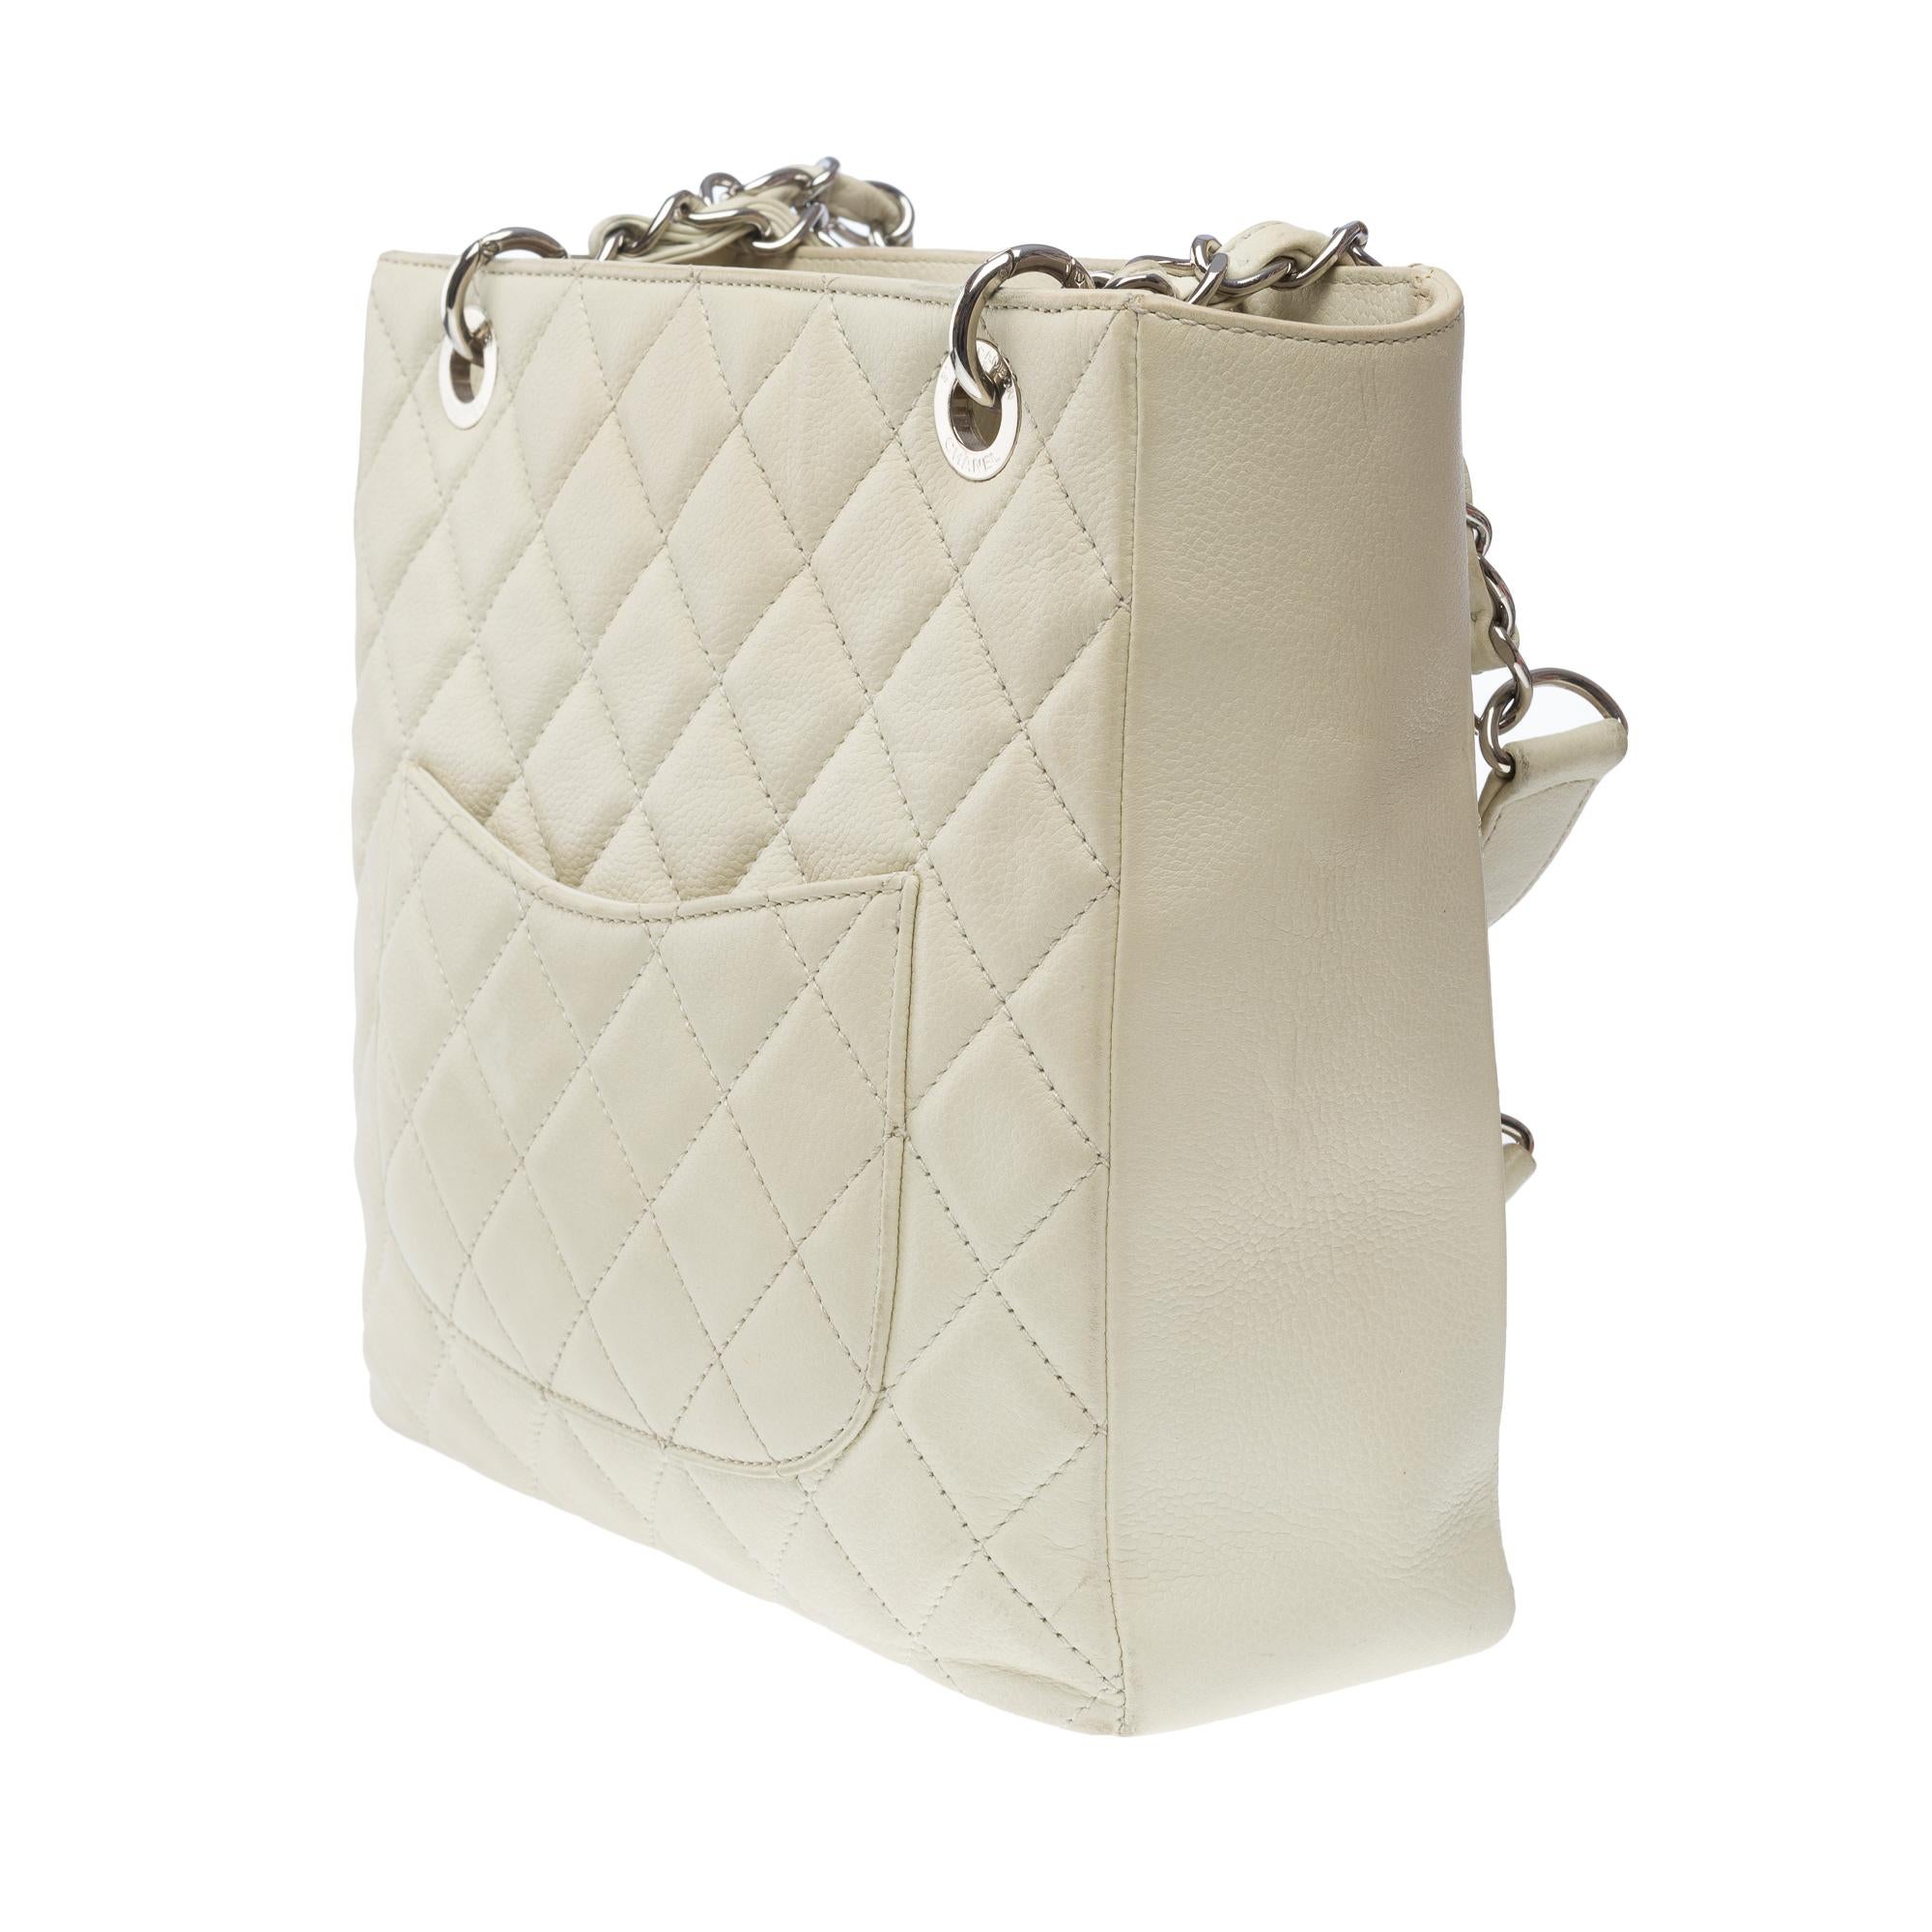  Chanel Petit Shopping Tote bag (PST) in Off-White Caviar quilted leather, SHW For Sale 2